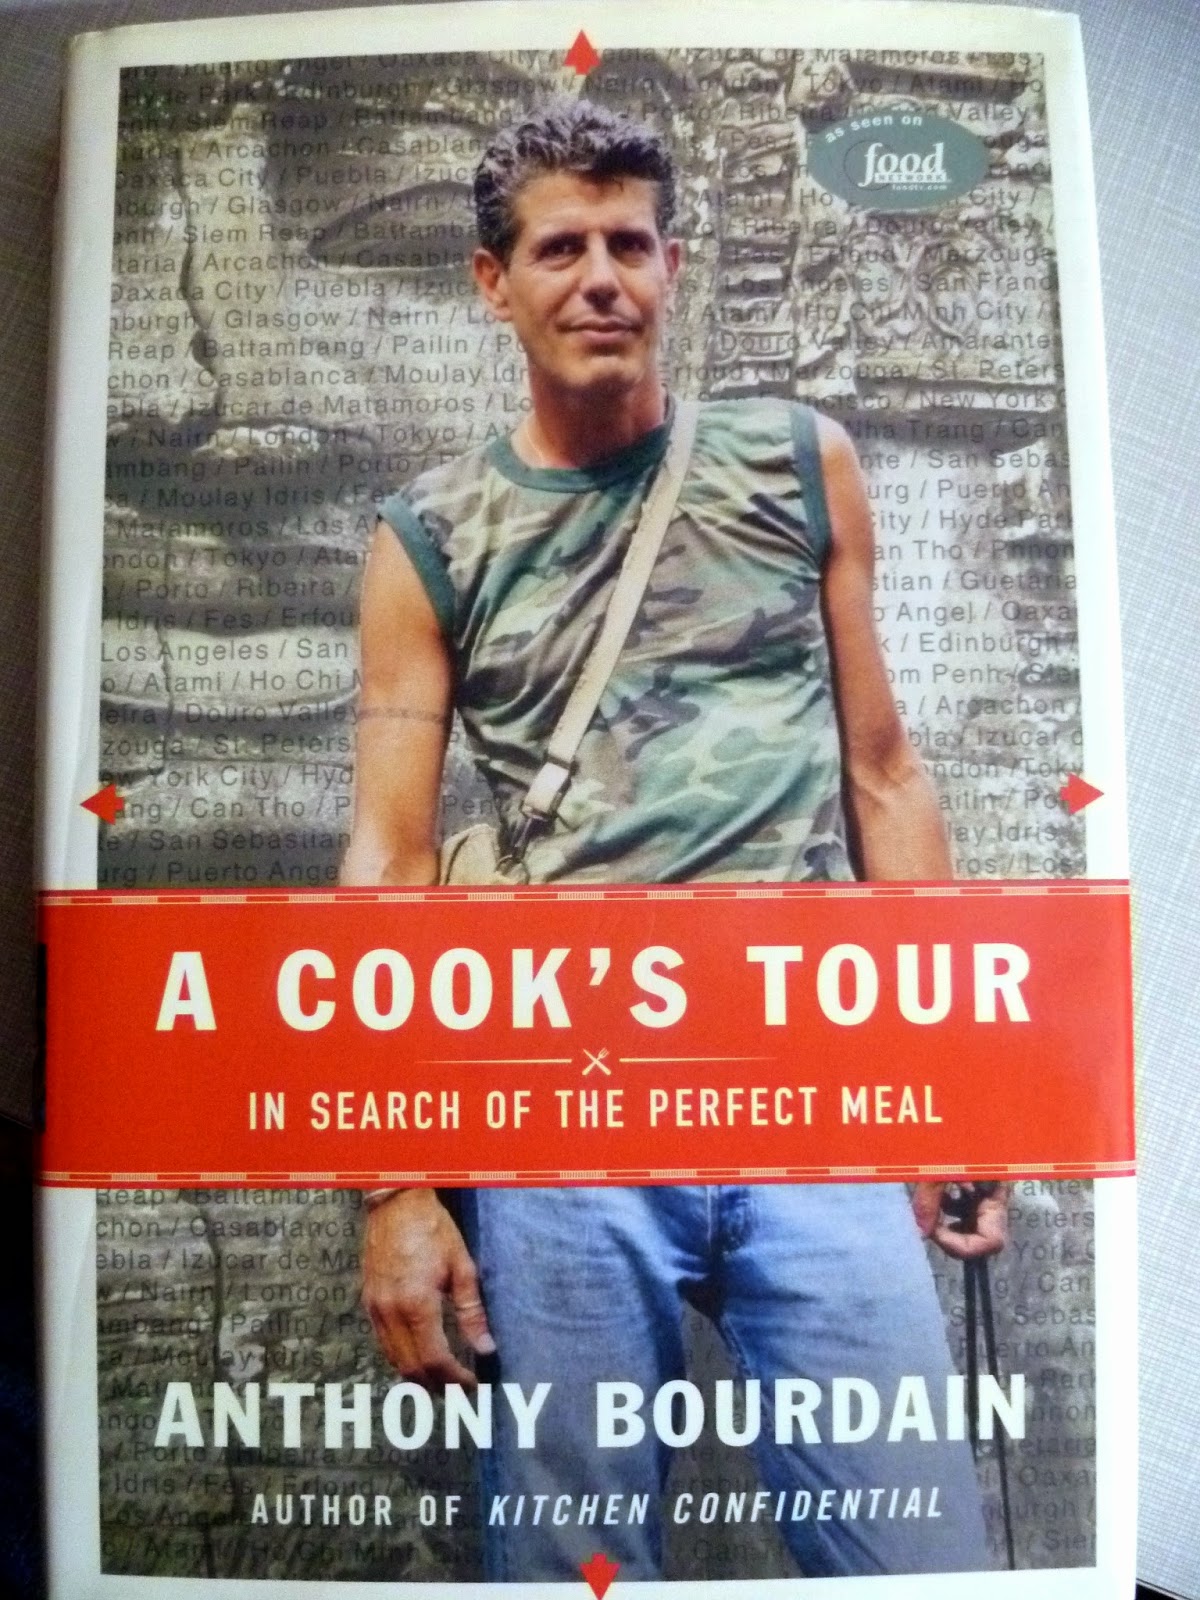 Foodie-Bee: The Cooking Gardener Collector: “A COOK’S TOUR - IN SEARCH ...